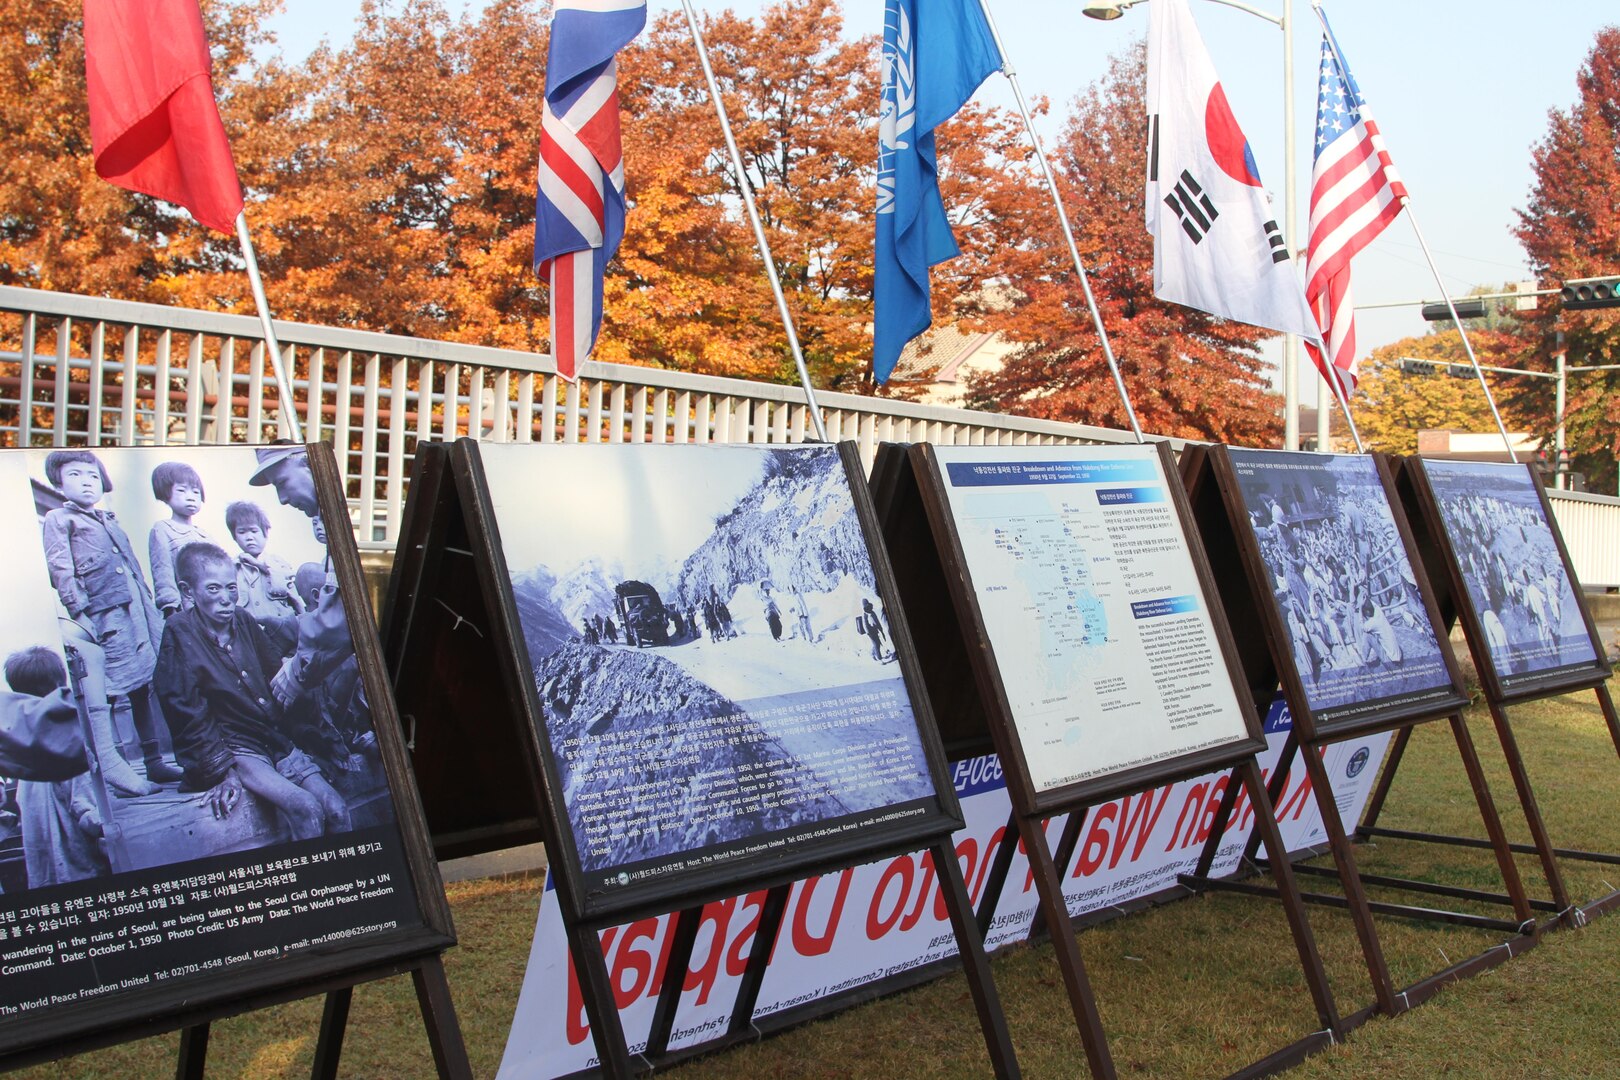 Pictures of war veterans who took part in the Korean War displayed during the Veterans Day ceremony at the Eighth Army Memorial, Yongsan, Republic of Korea, Nov. 11, 2016.
